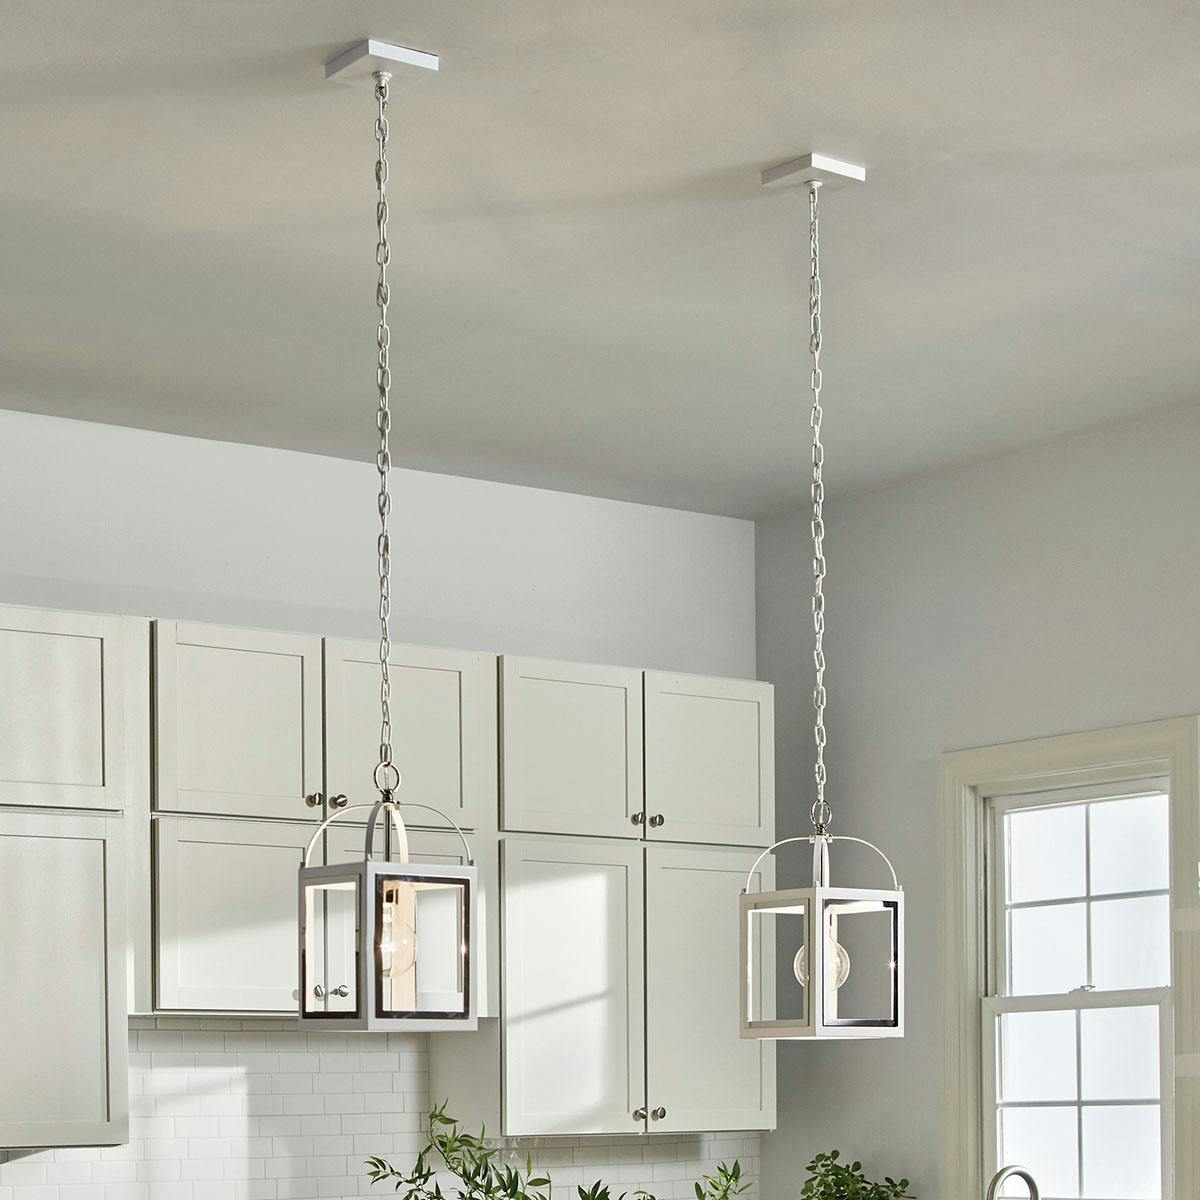 Day time Kichen image featuring Vath pendant 52030WH